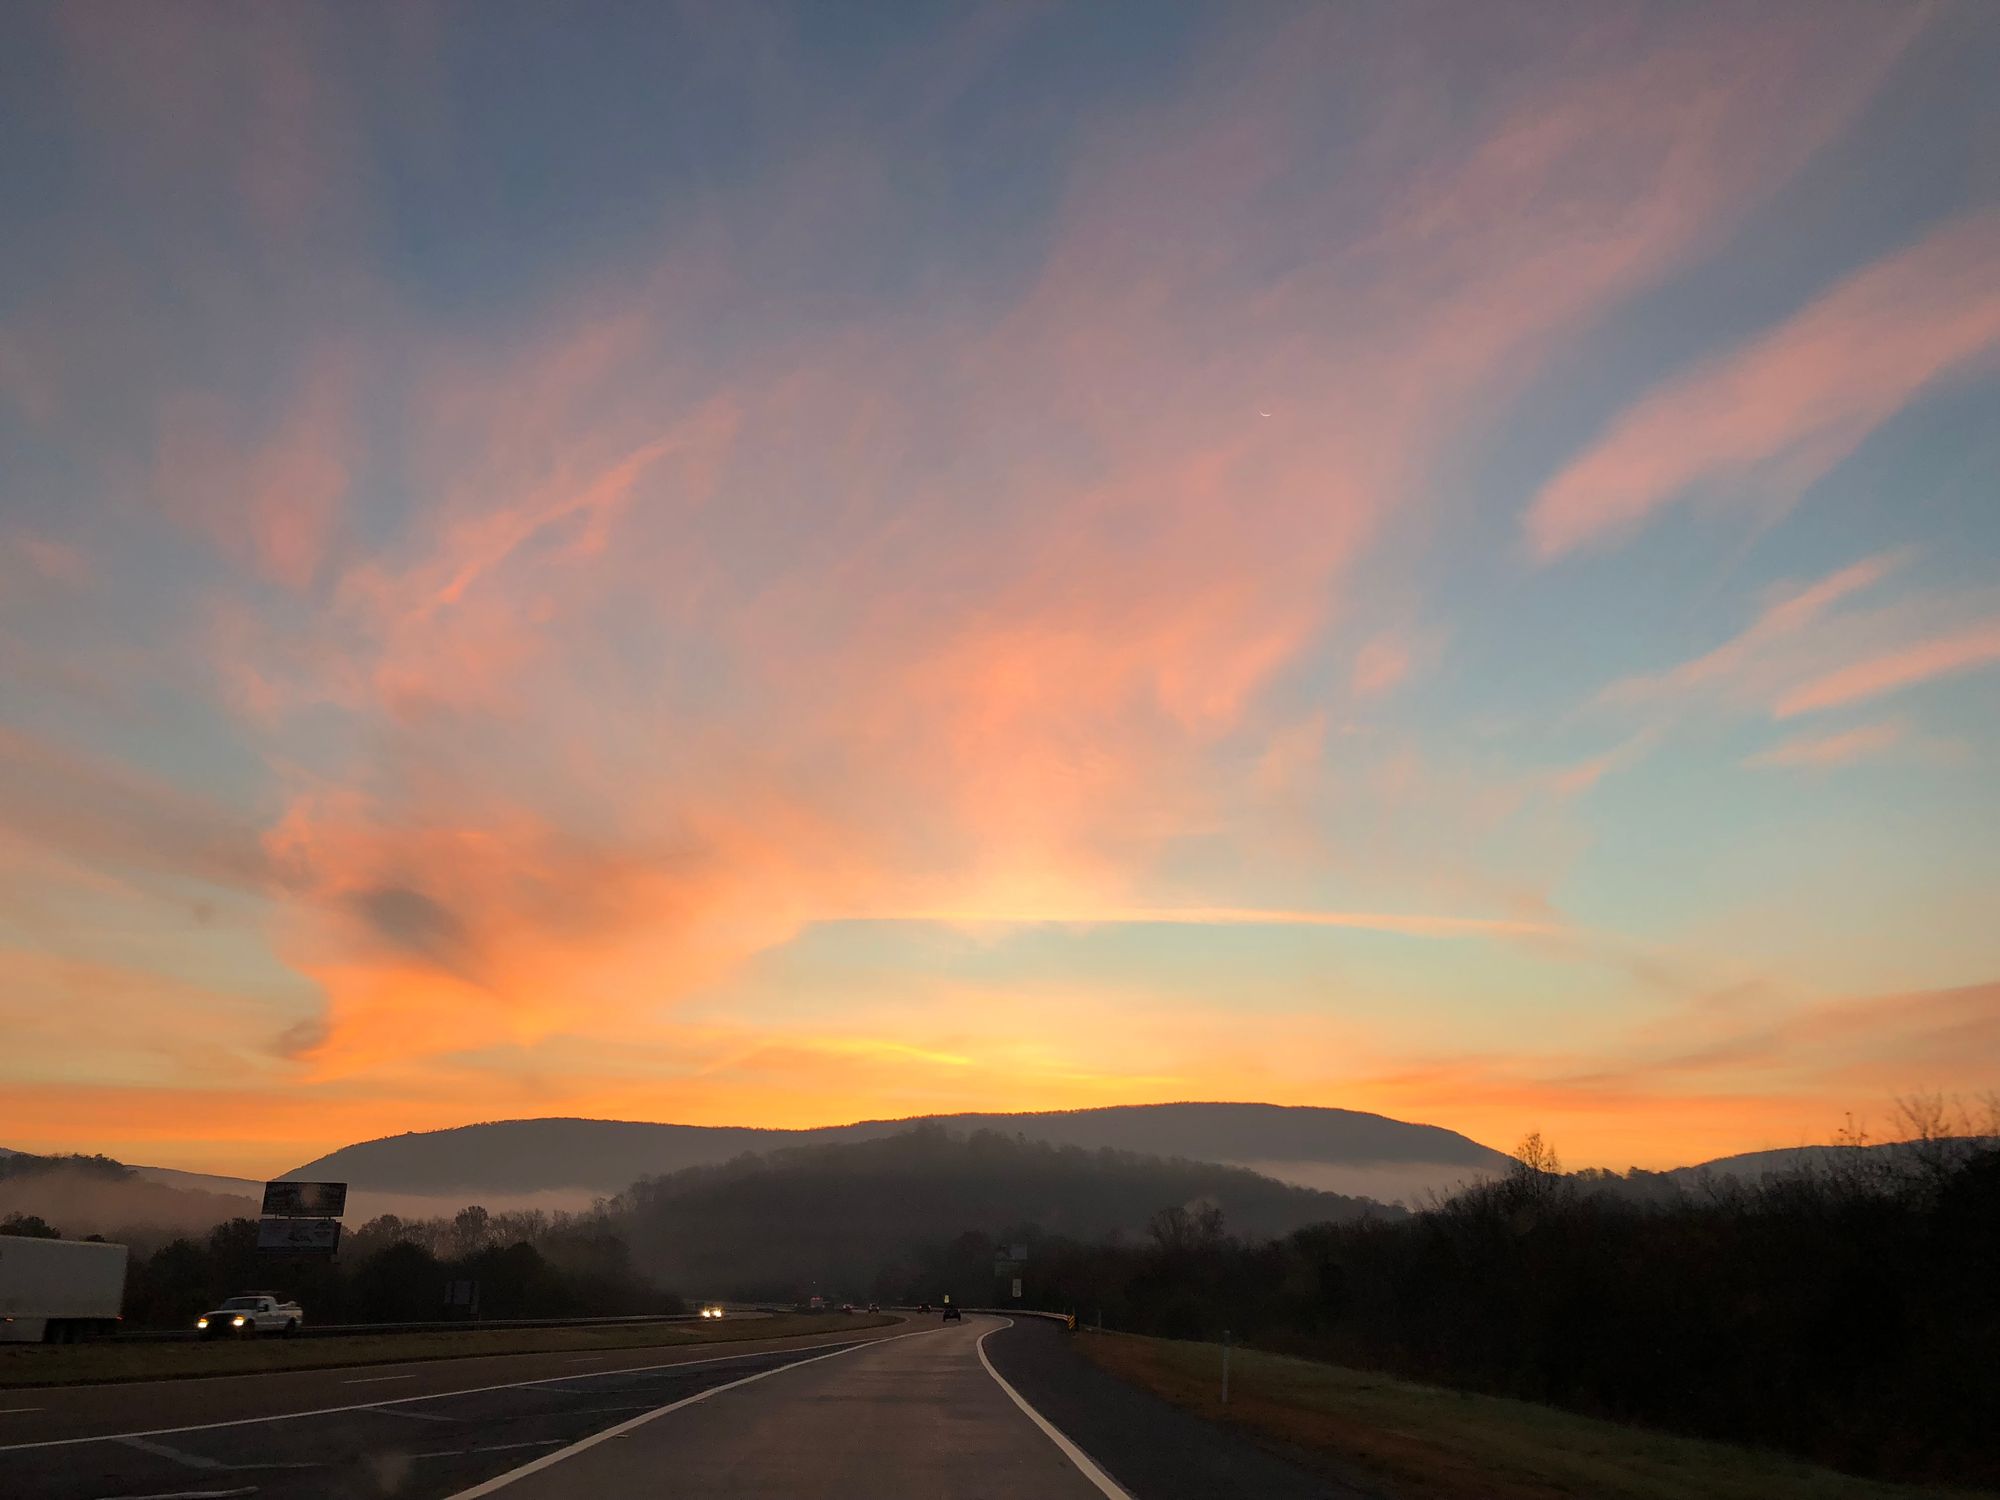 Sunrise over a winding road in Tennessee with mountains in the distance.